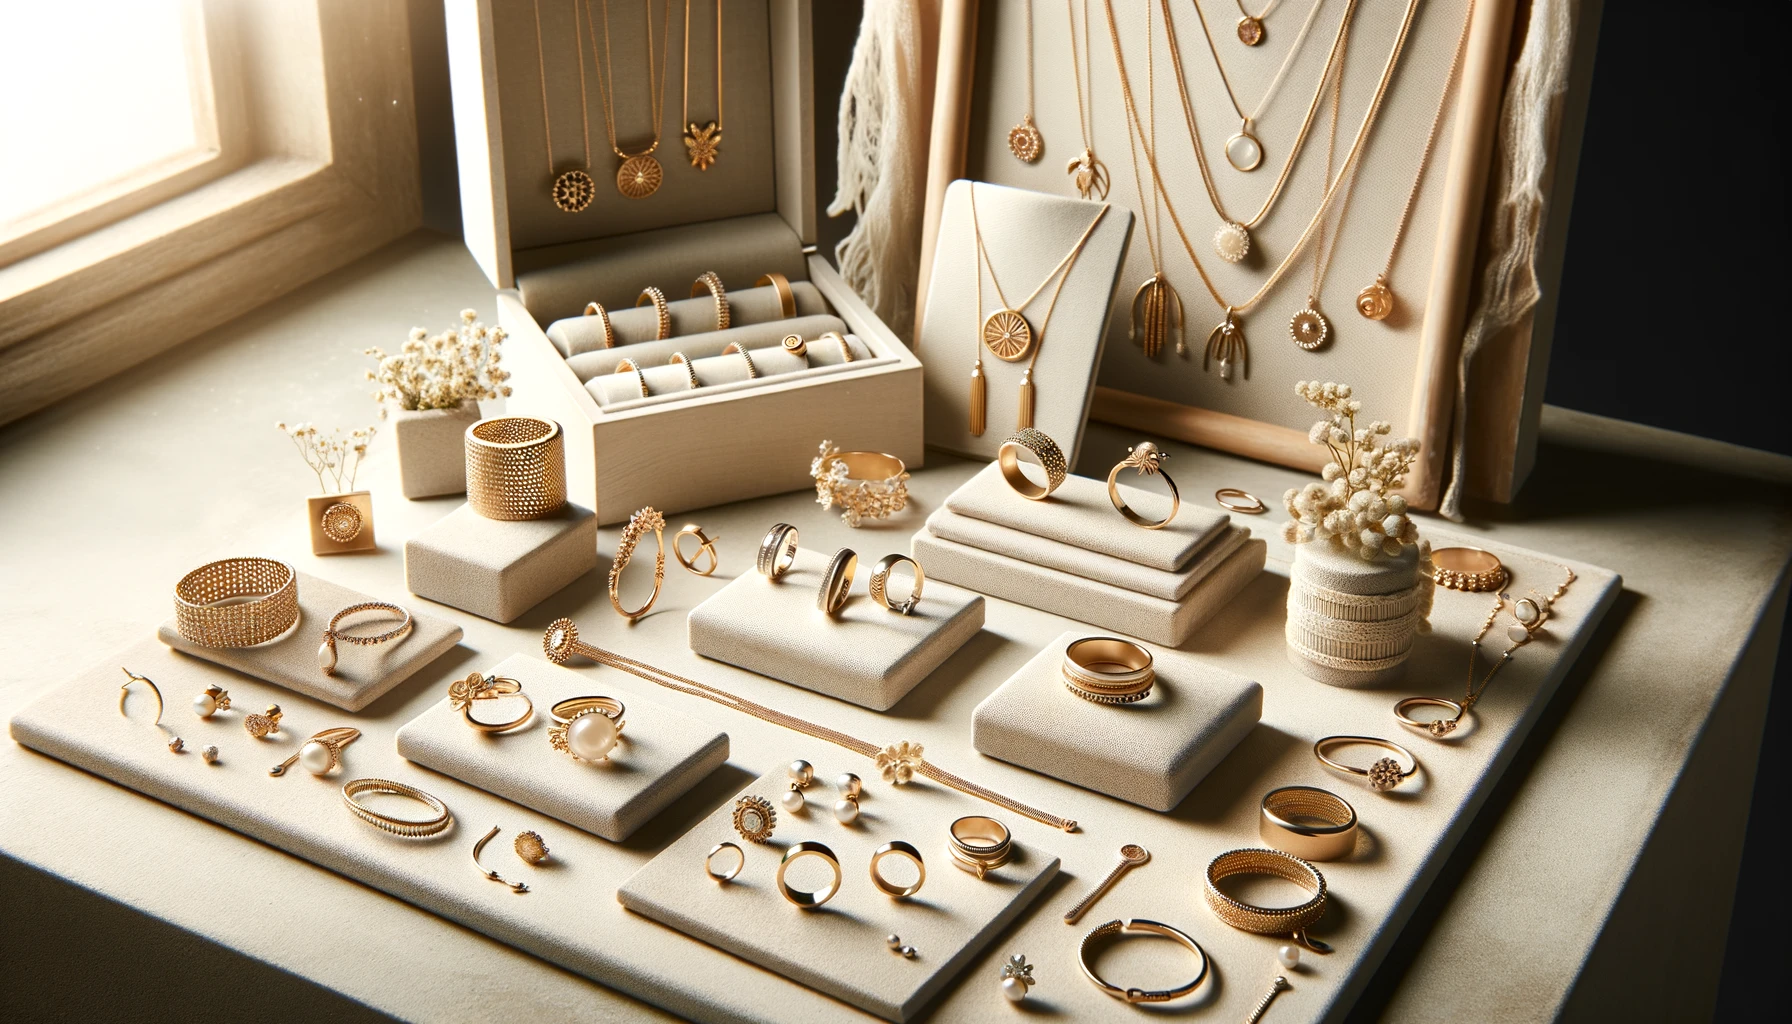 A-collection-of-eco-friendly-jewelry-including-rings-necklaces-bracelets-and-earrings-made-of-gold-and-silver-displayed-elegantly.